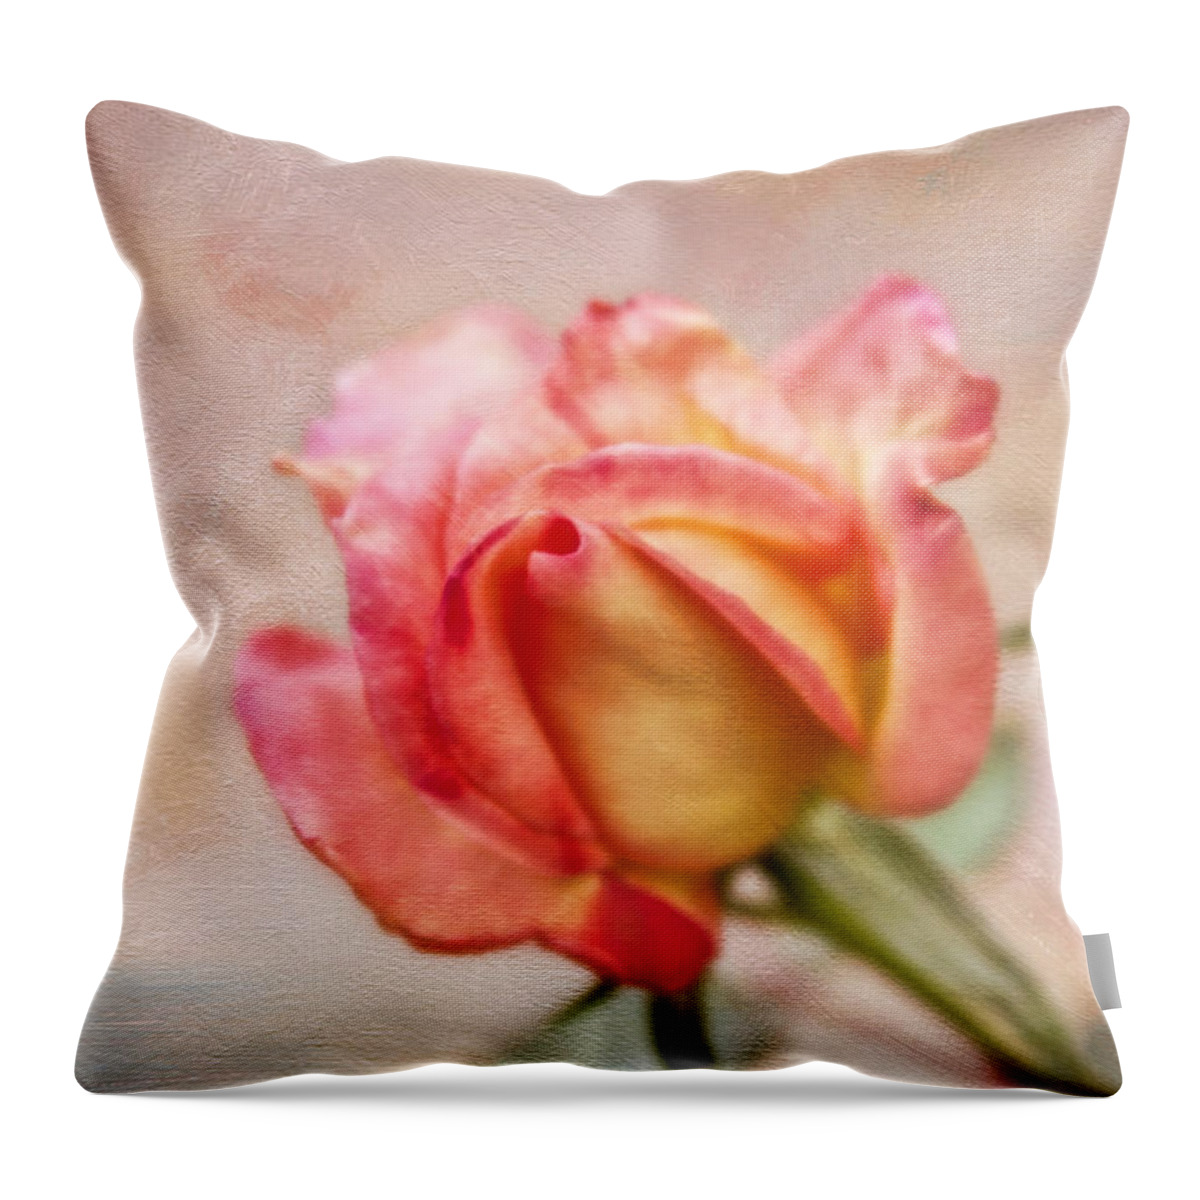 Rose Throw Pillow featuring the photograph Oil Painted Rose by Joan Bertucci